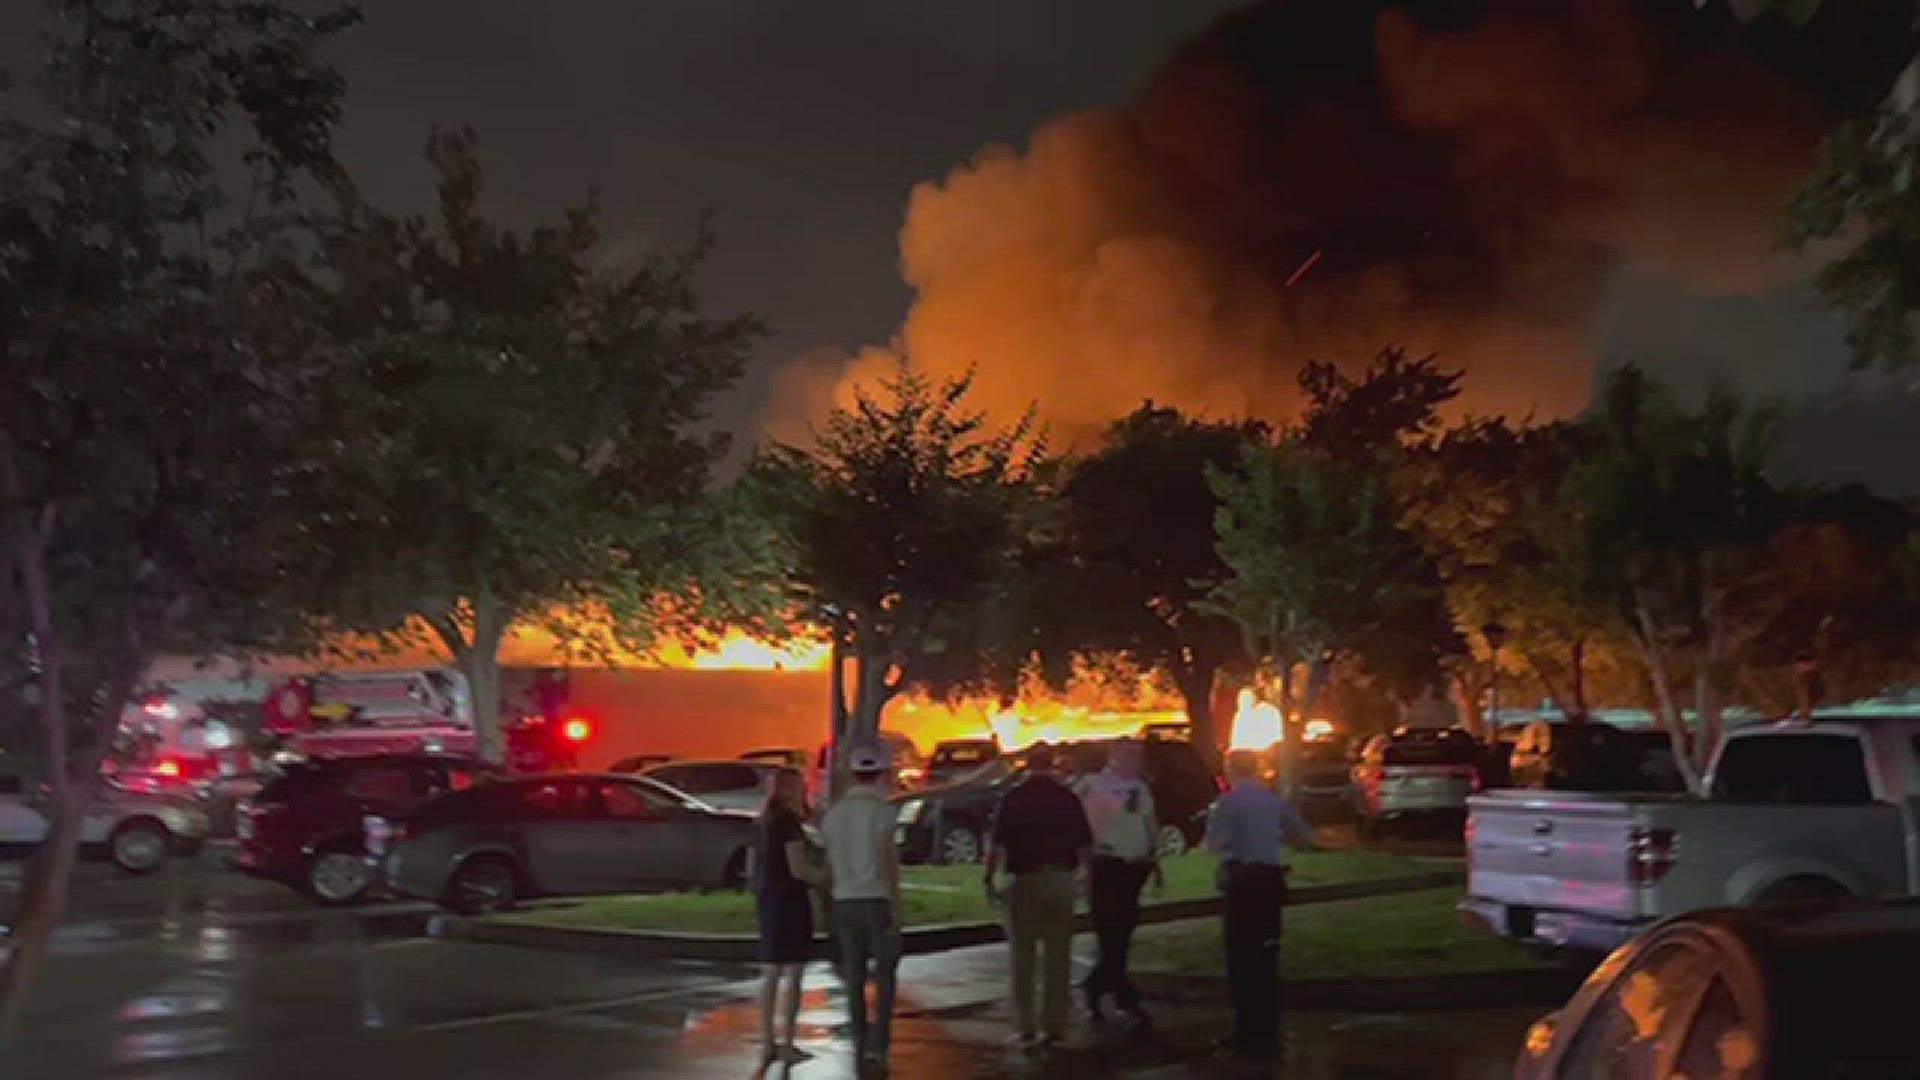 Video shows the fire at the Chateau Country Club in Kenner